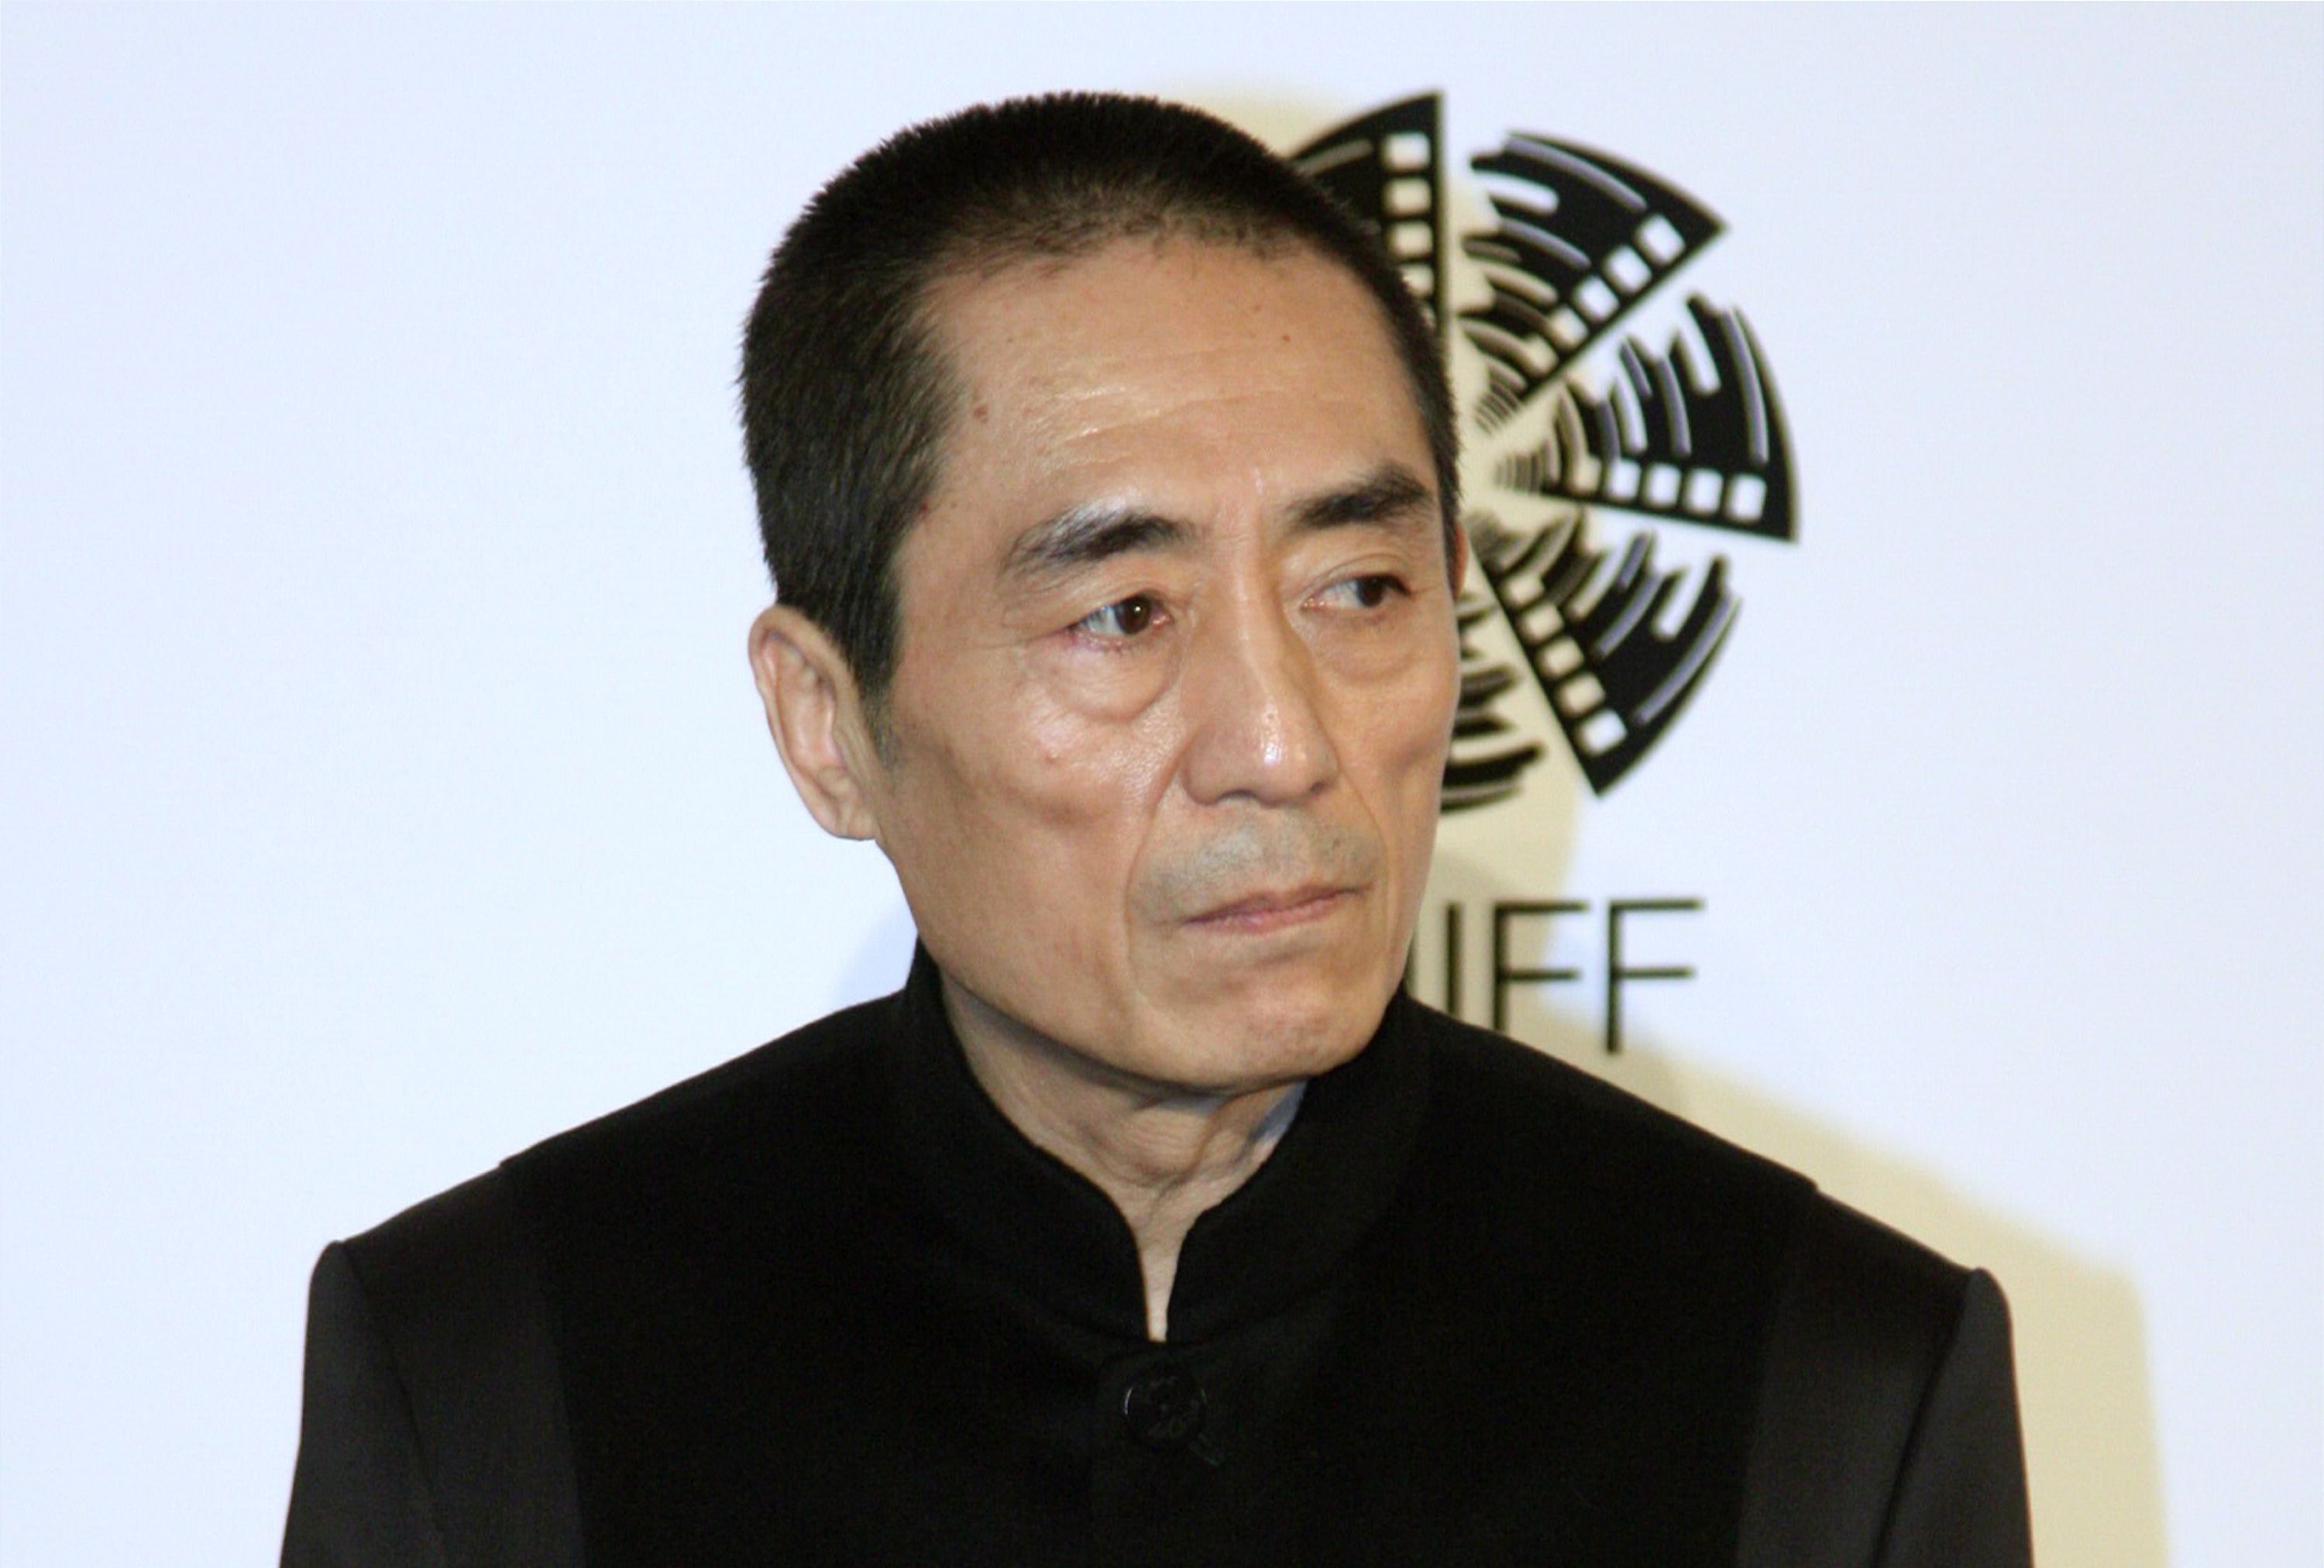 Zhang Yimou's search for age of innocence 